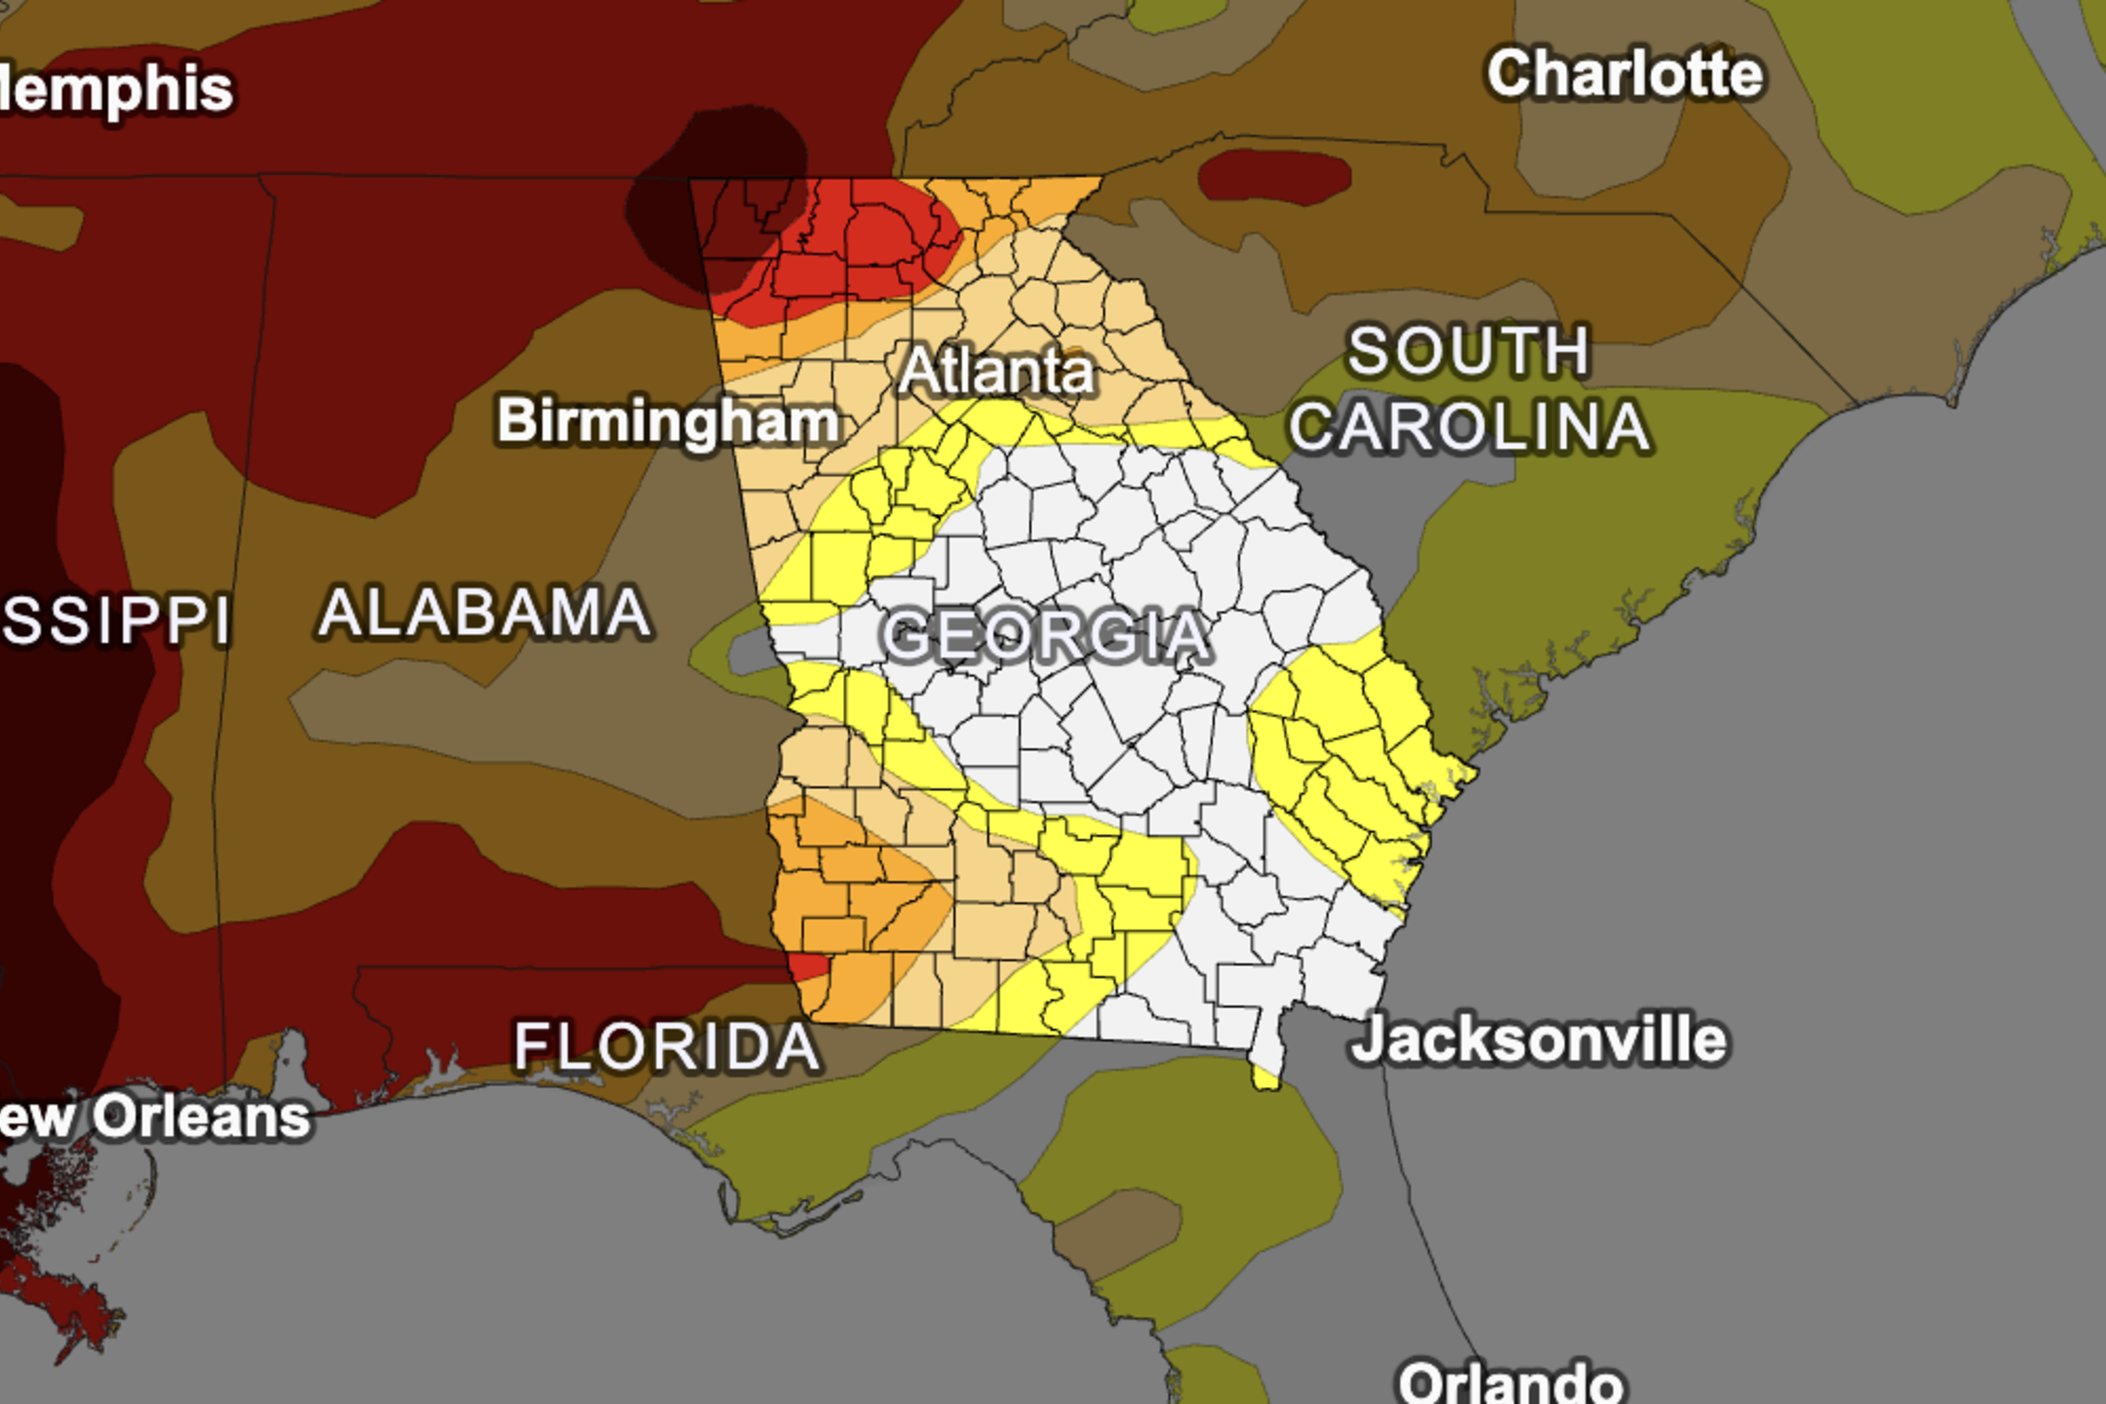 Drought conditions in North and West Georgia are expected to continue through November, 2023, the U.S. Drought Monitor indicated.